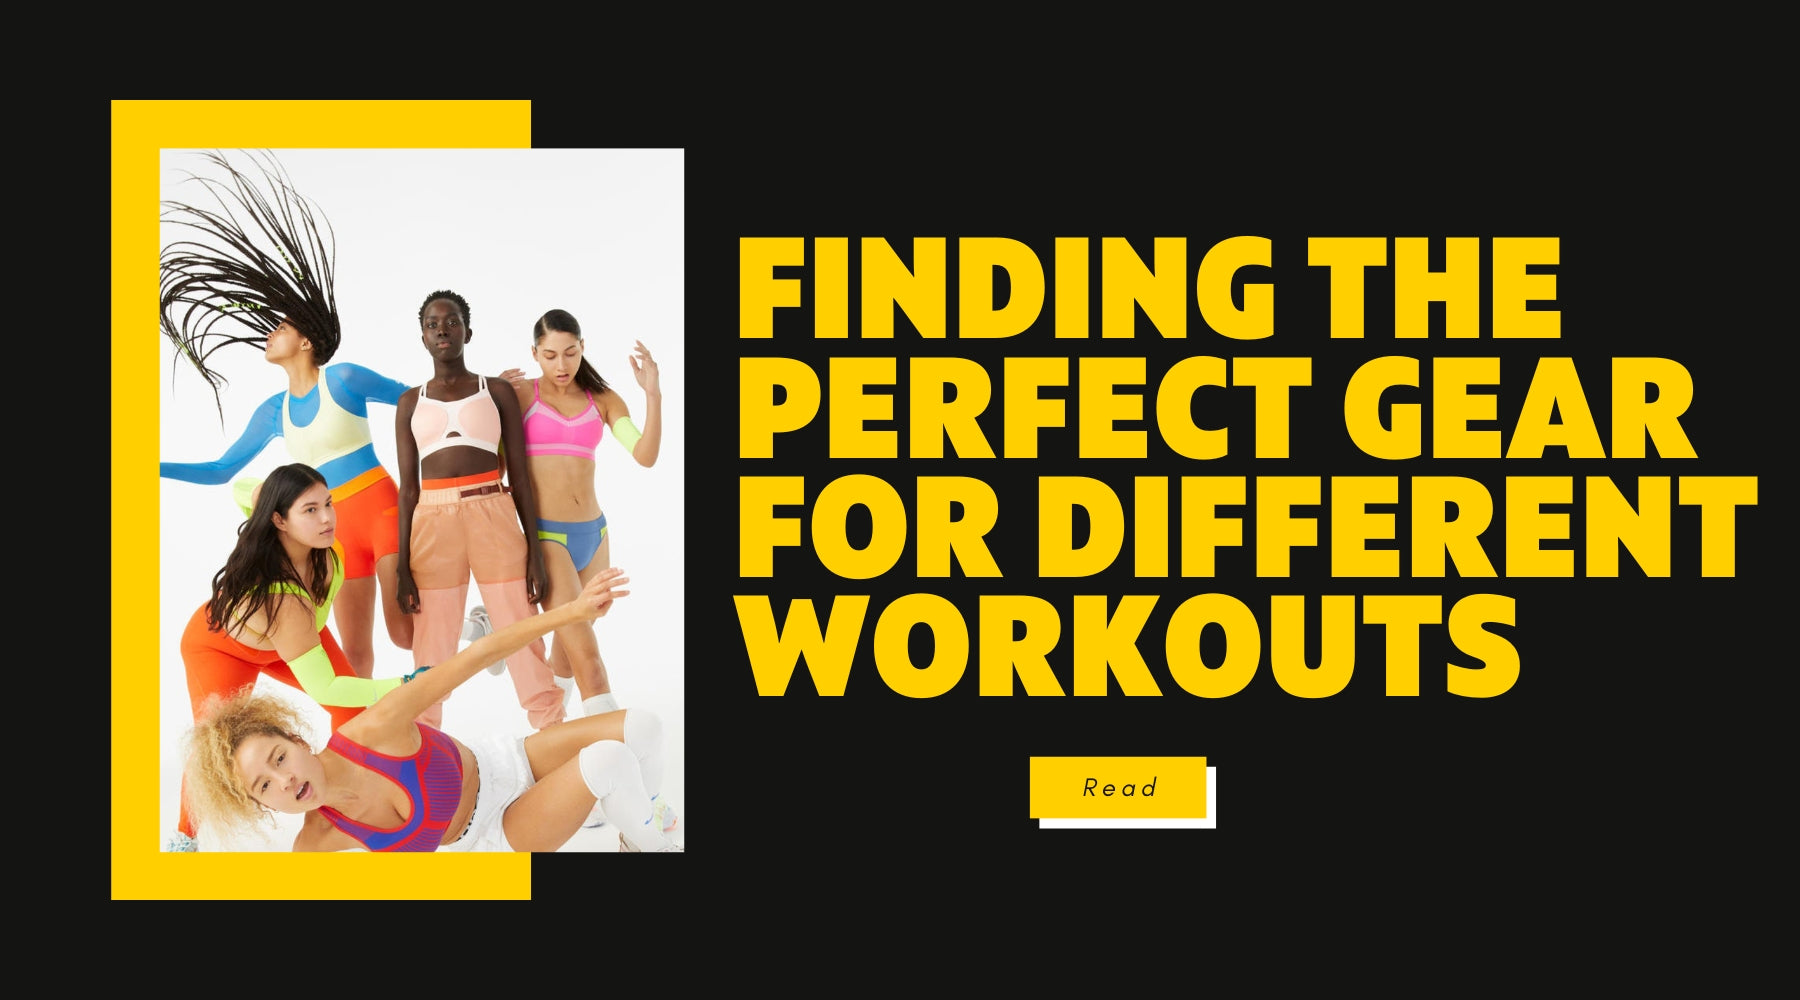 Finding the Perfect Gear for Different Workouts